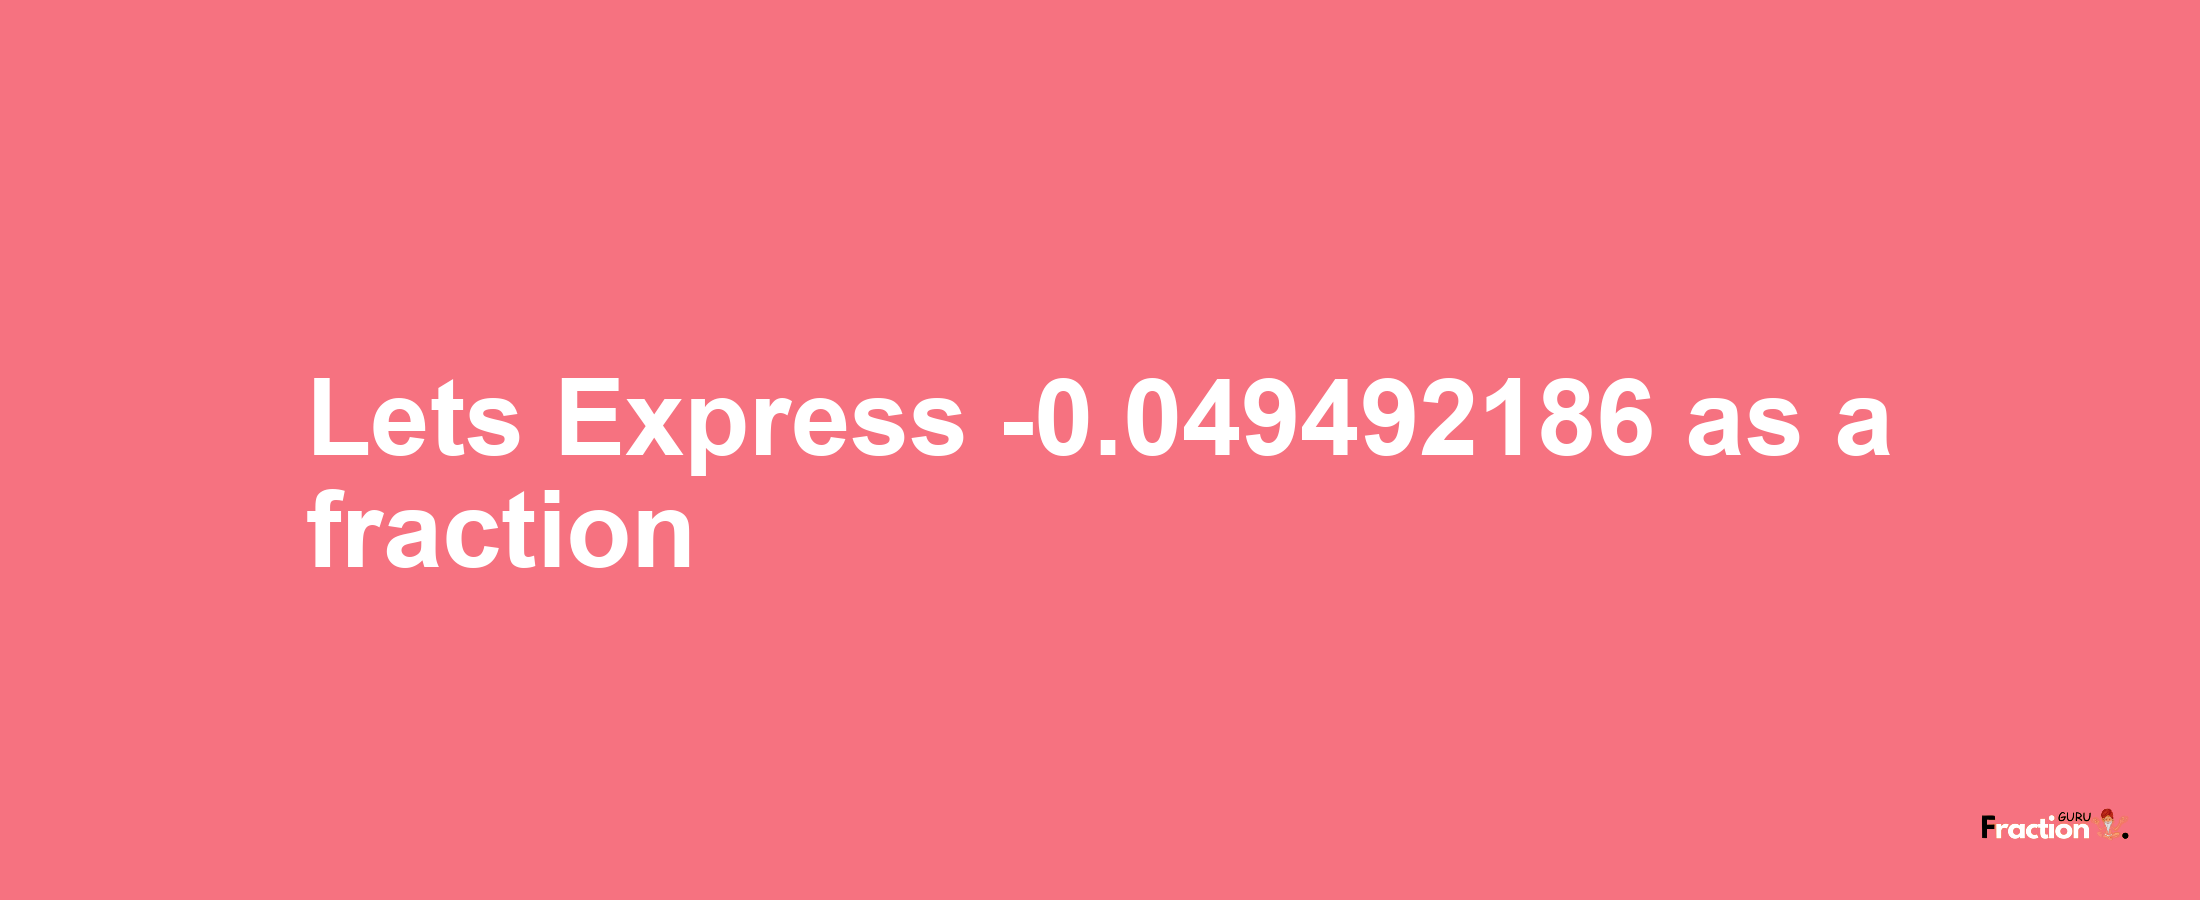 Lets Express -0.049492186 as afraction